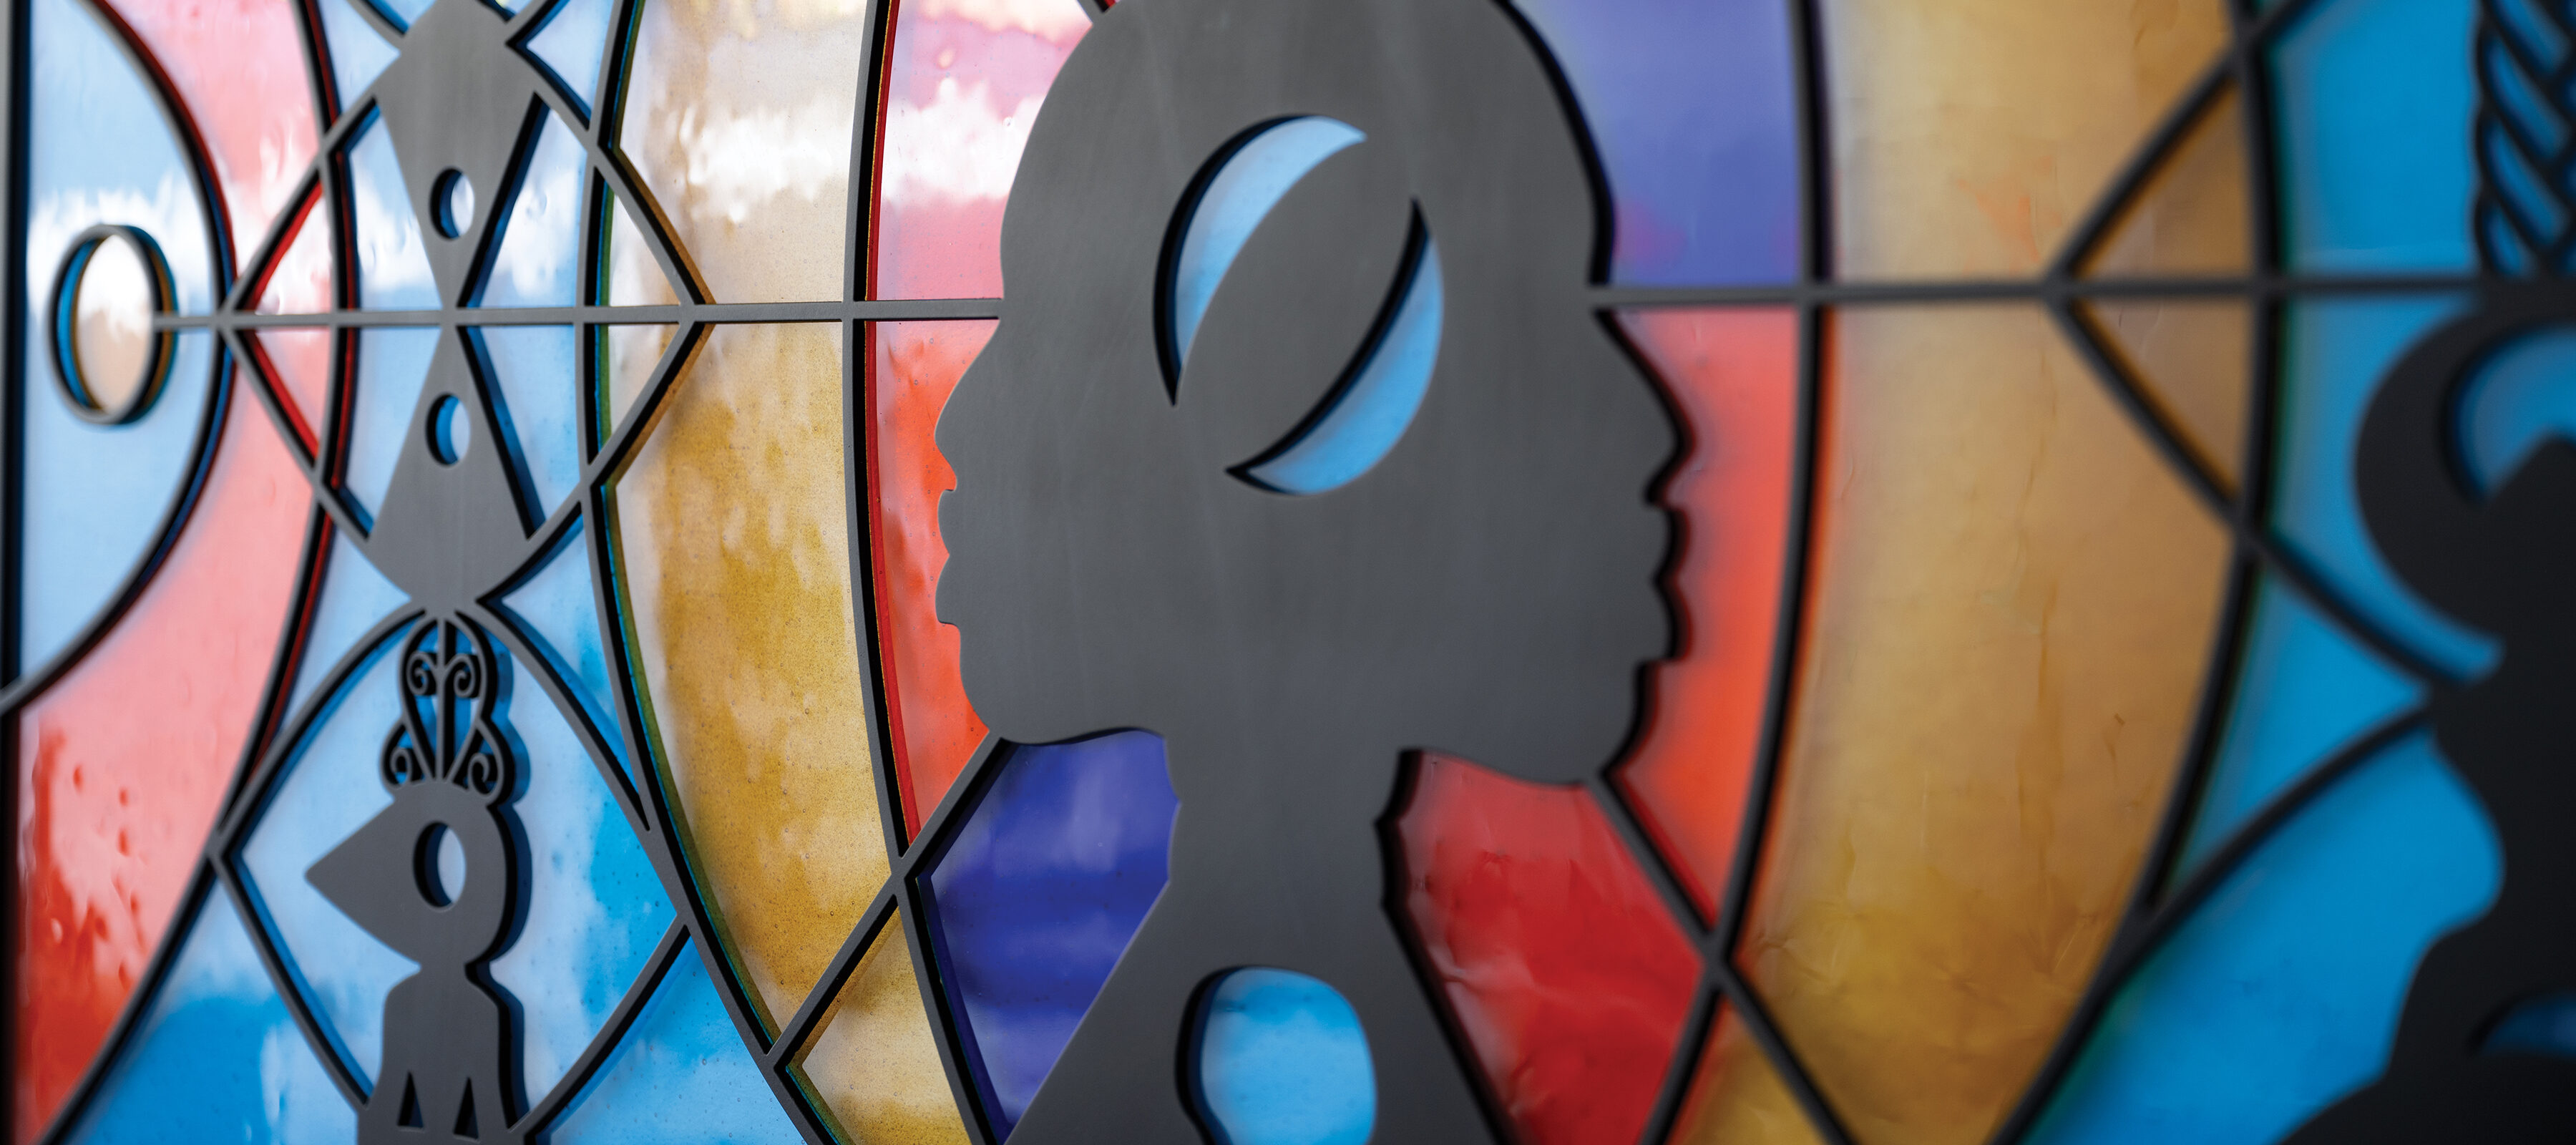 A sculpture hangs flat against the wall. It looks like a wide, stained glass window that can be lit from behind. There are two faces in profile in the center, positioned back-to-back, as if emerging from a line down the center of the piece. They are made out of black metal, as are several totem-like designs positioned in front of bright orange, blue-green, and yellow abstract shapes. The abstract shapes are made of fused glass.